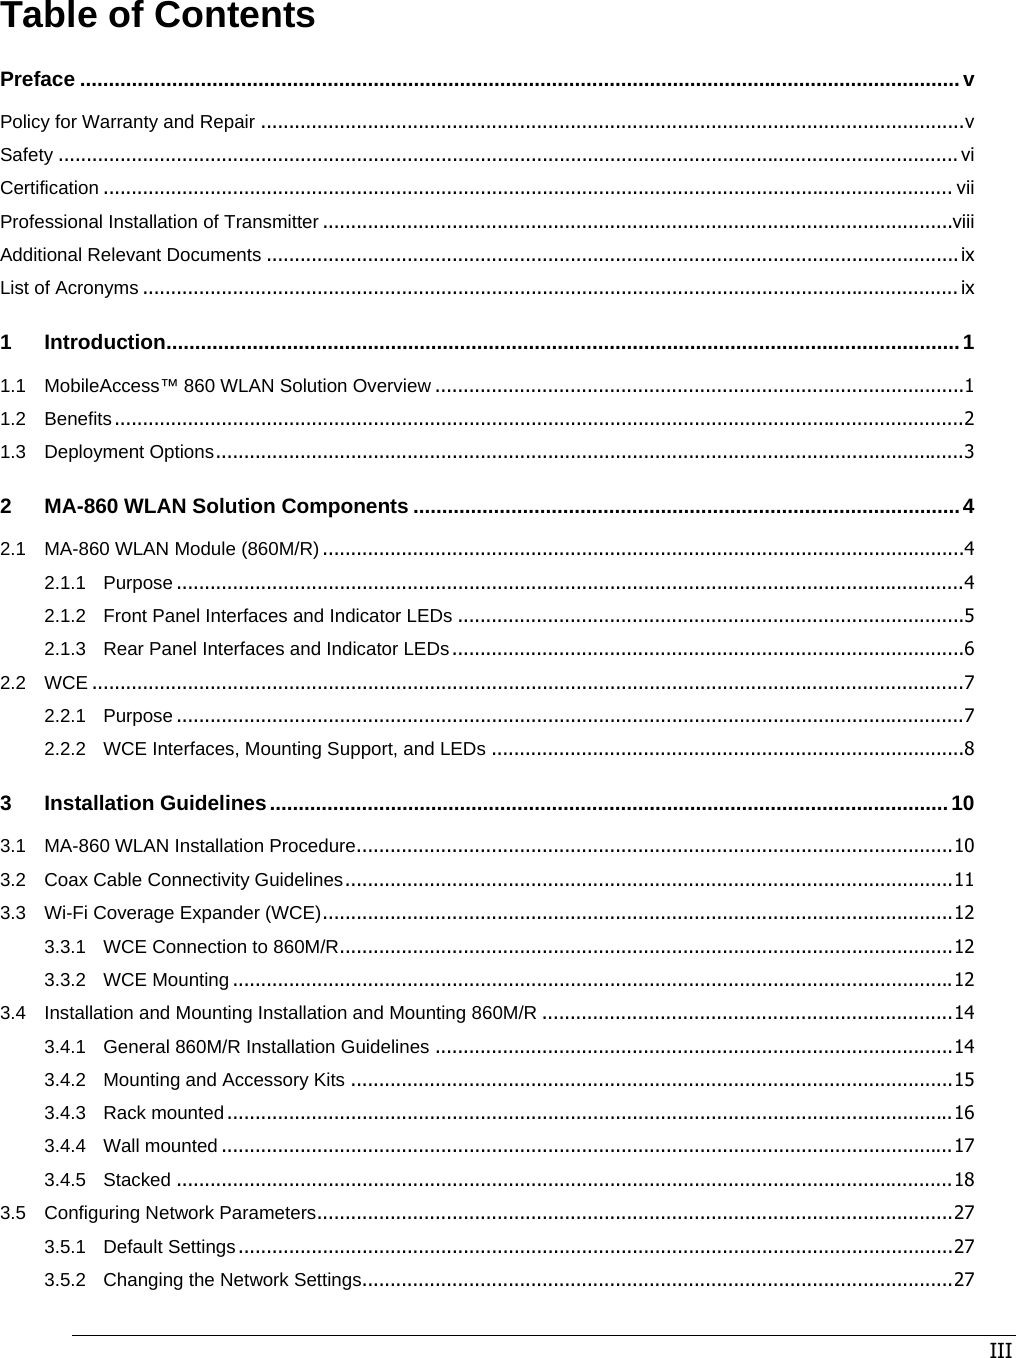 III Table of Contents Preface .........................................................................................................................................................v Policy for Warranty and Repair .............................................................................................................................v Safety ................................................................................................................................................................ vi Certification ....................................................................................................................................................... vii Professional Installation of Transmitter ................................................................................................................viii Additional Relevant Documents ........................................................................................................................... ix List of Acronyms ................................................................................................................................................. ix 1 Introduction..........................................................................................................................................1 1.1 MobileAccess™ 860 WLAN Solution Overview ..............................................................................................1 1.2 Benefits.......................................................................................................................................................2 1.3 Deployment Options.....................................................................................................................................3 2 MA-860 WLAN Solution Components ...............................................................................................4 2.1 MA-860 WLAN Module (860M/R) ..................................................................................................................4 2.1.1 Purpose ............................................................................................................................................4 2.1.2 Front Panel Interfaces and Indicator LEDs ..........................................................................................5 2.1.3 Rear Panel Interfaces and Indicator LEDs...........................................................................................6 2.2 WCE ...........................................................................................................................................................7 2.2.1 Purpose ............................................................................................................................................7 2.2.2 WCE Interfaces, Mounting Support, and LEDs ....................................................................................8 3 Installation Guidelines......................................................................................................................10 3.1 MA-860 WLAN Installation Procedure..........................................................................................................10 3.2 Coax Cable Connectivity Guidelines............................................................................................................11 3.3 Wi-Fi Coverage Expander (WCE)................................................................................................................12 3.3.1 WCE Connection to 860M/R.............................................................................................................12 3.3.2 WCE Mounting ................................................................................................................................12 3.4 Installation and Mounting Installation and Mounting 860M/R .........................................................................14 3.4.1 General 860M/R Installation Guidelines ............................................................................................14 3.4.2 Mounting and Accessory Kits ...........................................................................................................15 3.4.3 Rack mounted.................................................................................................................................16 3.4.4 Wall mounted ..................................................................................................................................17 3.4.5 Stacked ..........................................................................................................................................18 3.5 Configuring Network Parameters.................................................................................................................27 3.5.1 Default Settings...............................................................................................................................27 3.5.2 Changing the Network Settings.........................................................................................................27 